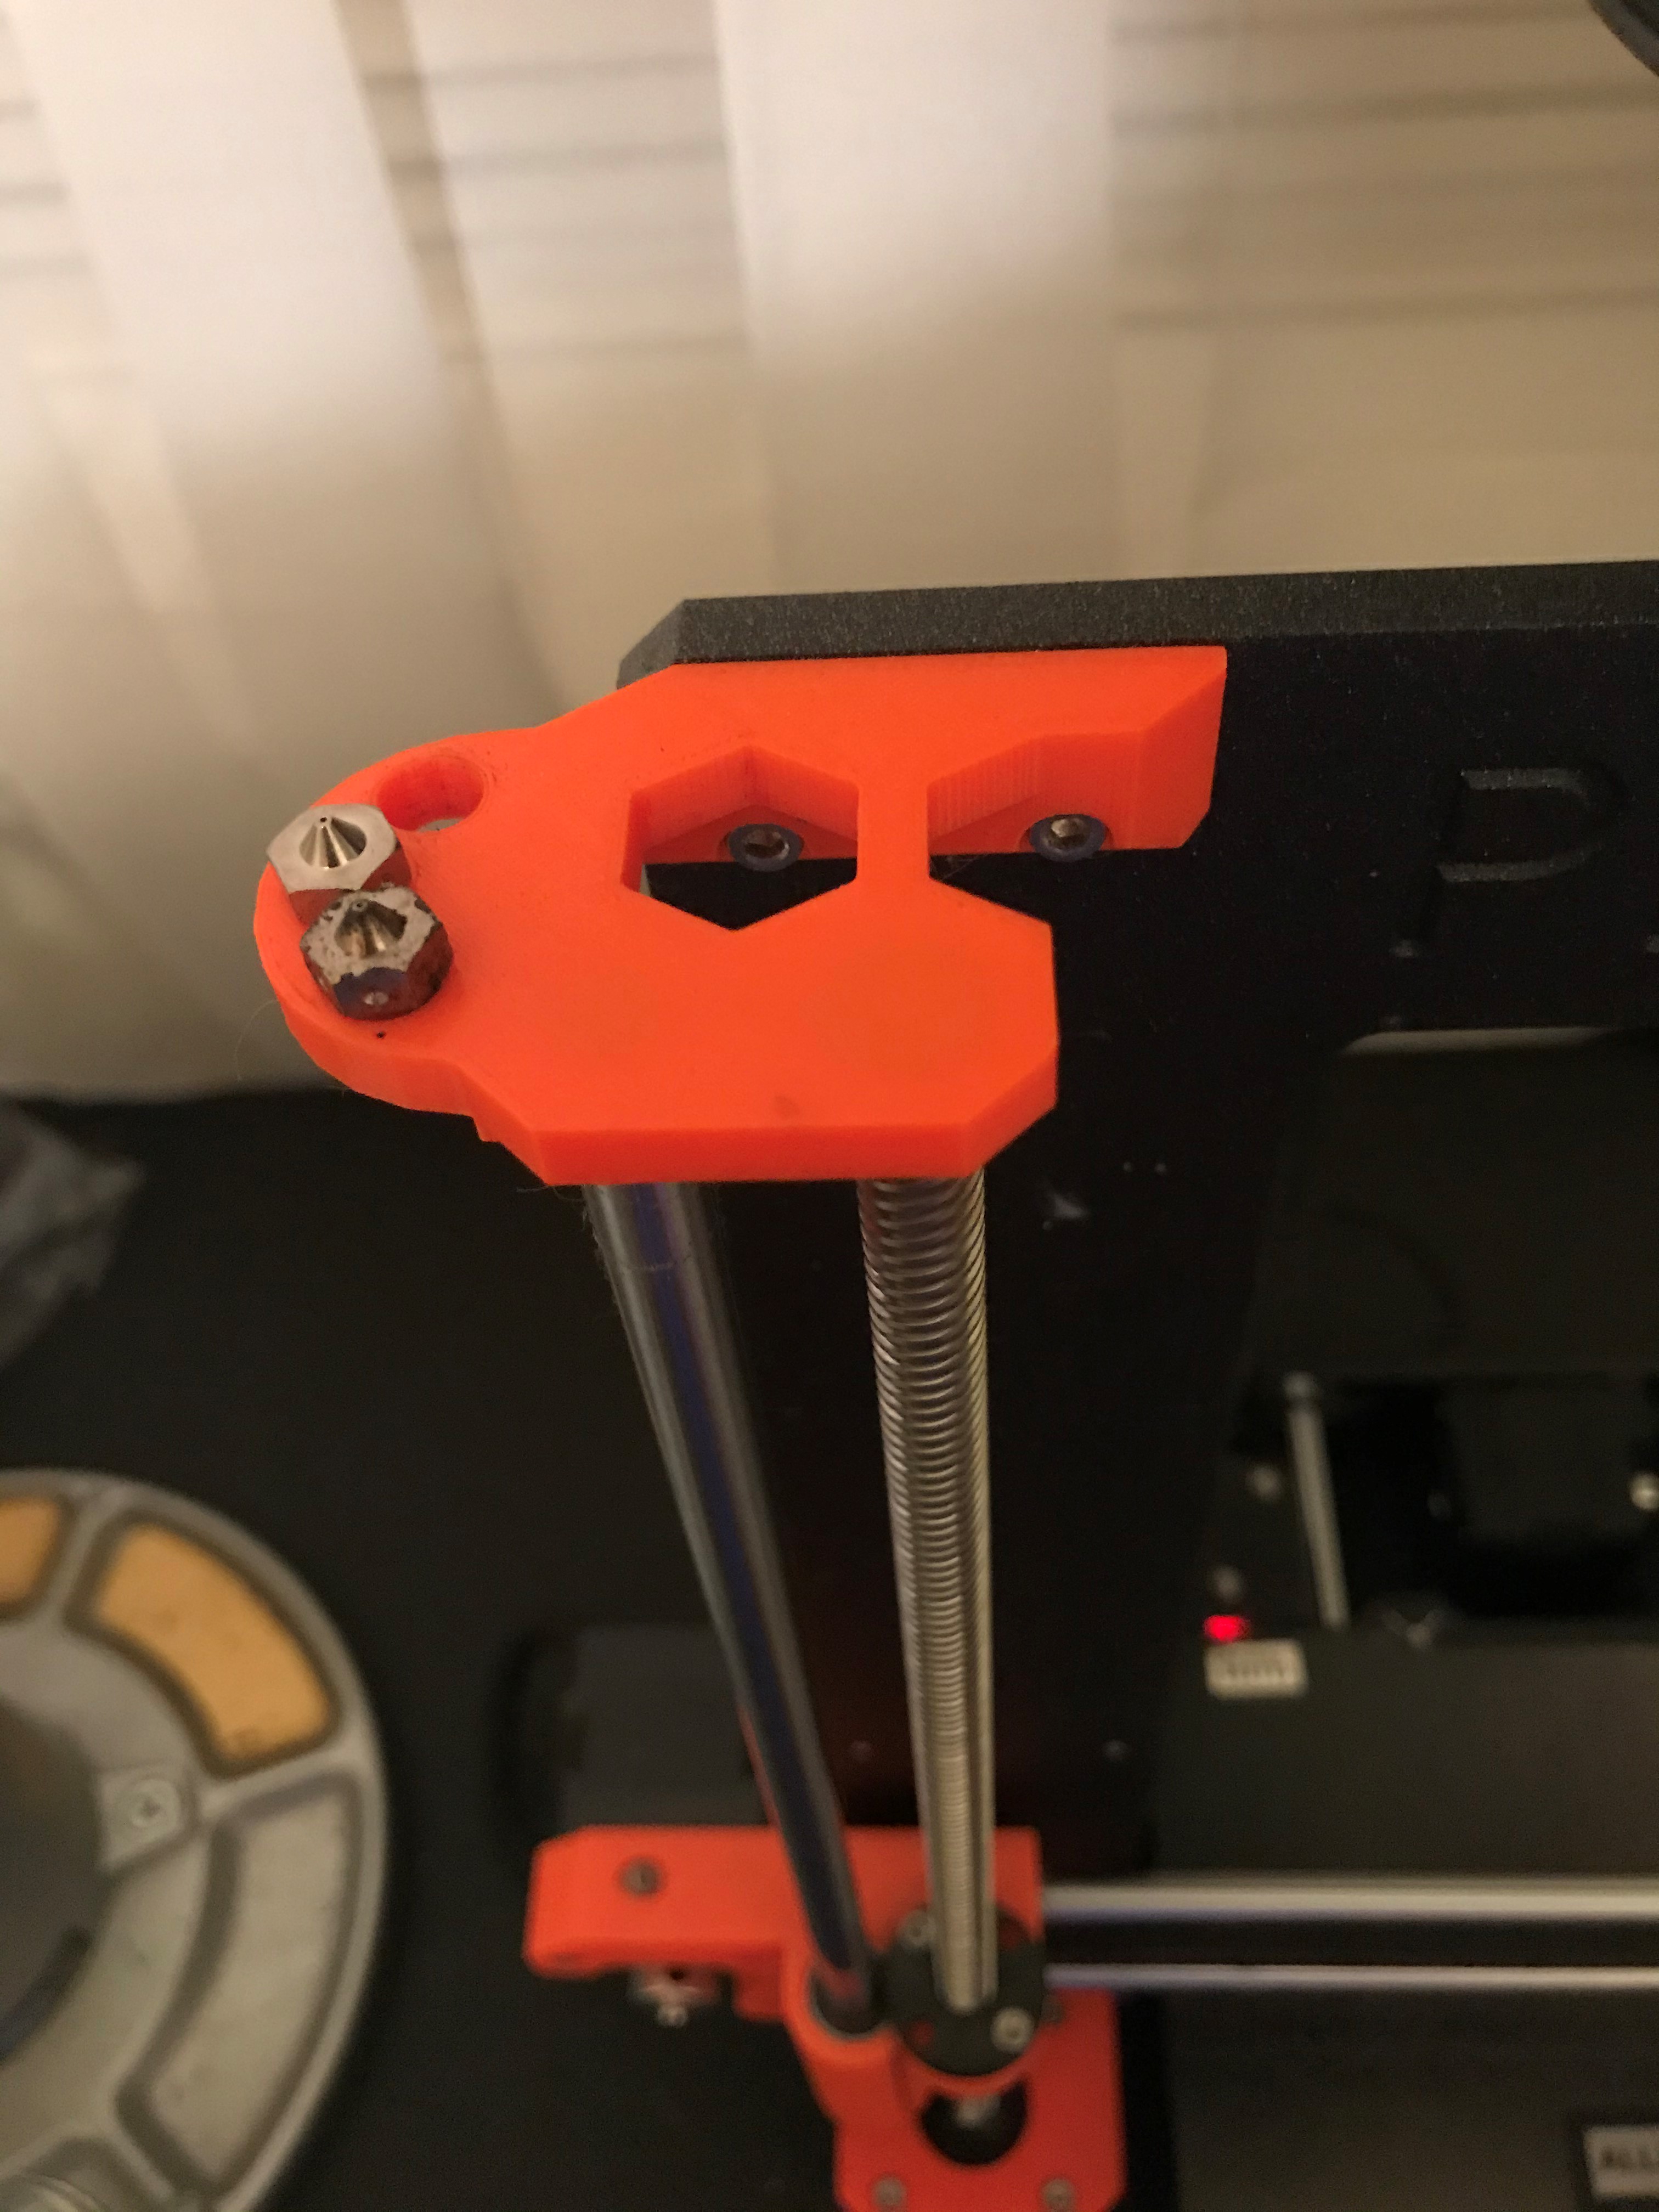 Z-Axis Mod - Nozzle Holster - Original Prusa I3 MK3S+